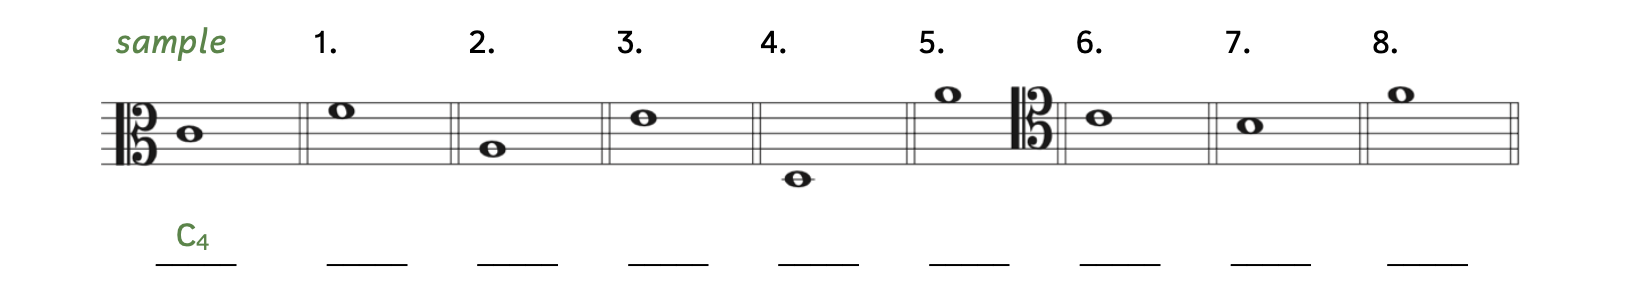 Exercise identifying pitches in alto clef and tenor clef. Numbers 1 through 5 are in the alto clef. The sample shows a note on the third line. The sample's answer is C4. Number 1, fourth space of the staff. Number 2, second line of the staff. Number 3, fourth line of the staff. Number 1, ledger line below the staff. Number 5, first space above the staff. Numbers 6 through 8 are in the tenor clef. Number 6, fourth line of the staff. Number 7, third space of the staff. Number 8, first space above the staff.